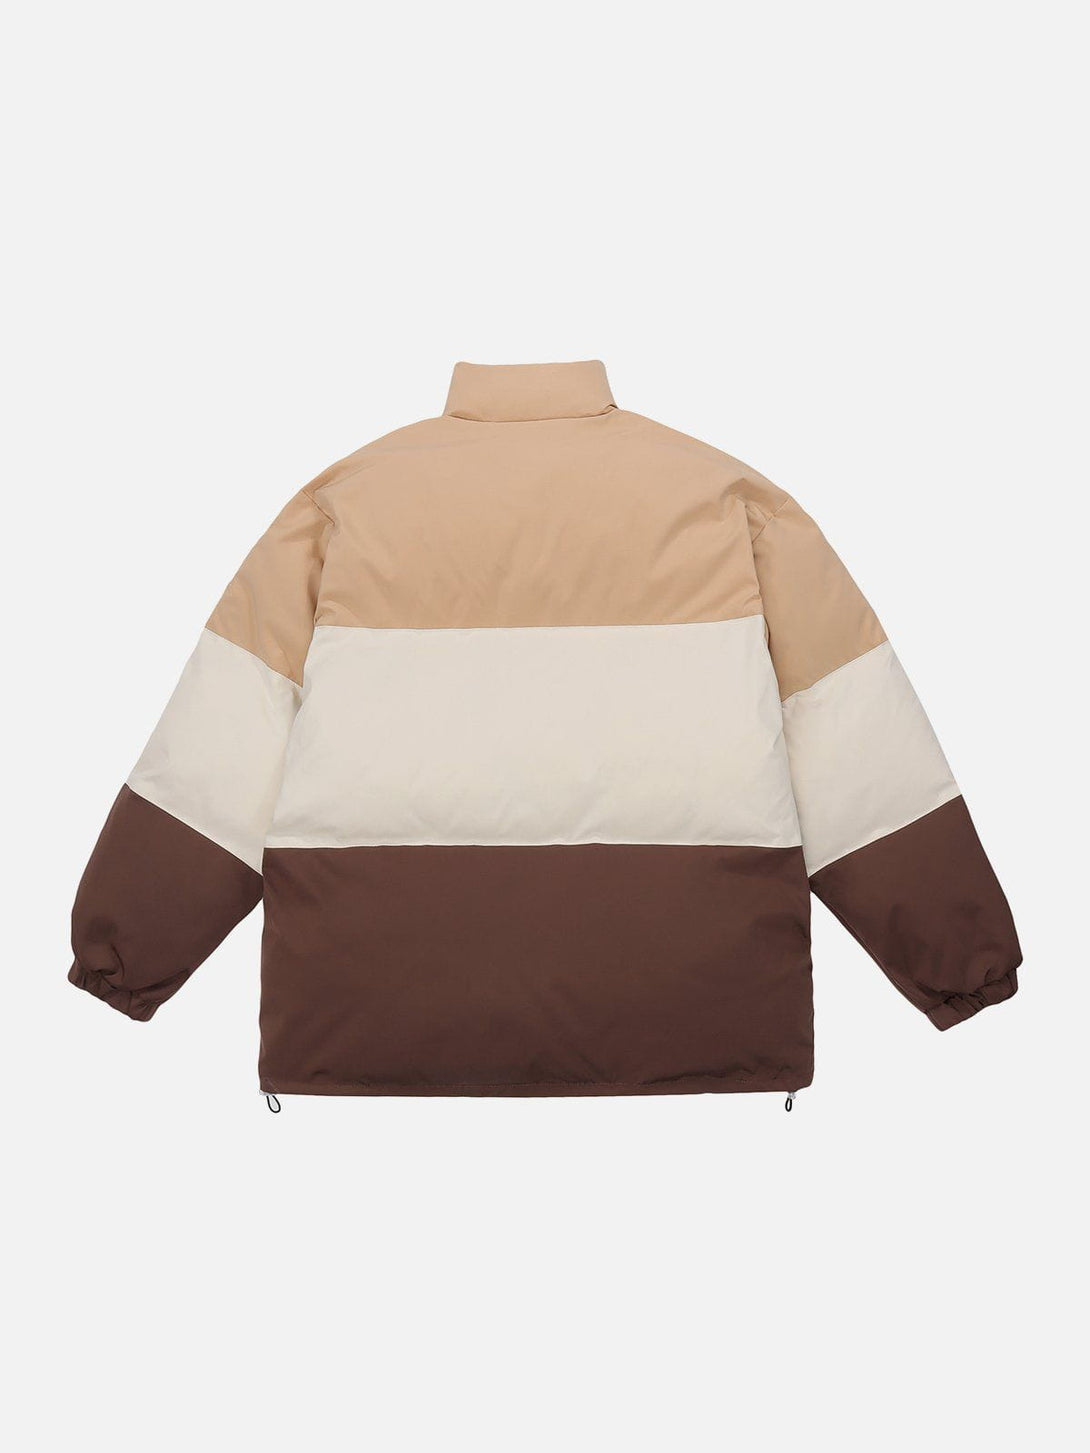 Levefly - Retro Colorblock Stand Collar Winter Coat - Streetwear Fashion - levefly.com